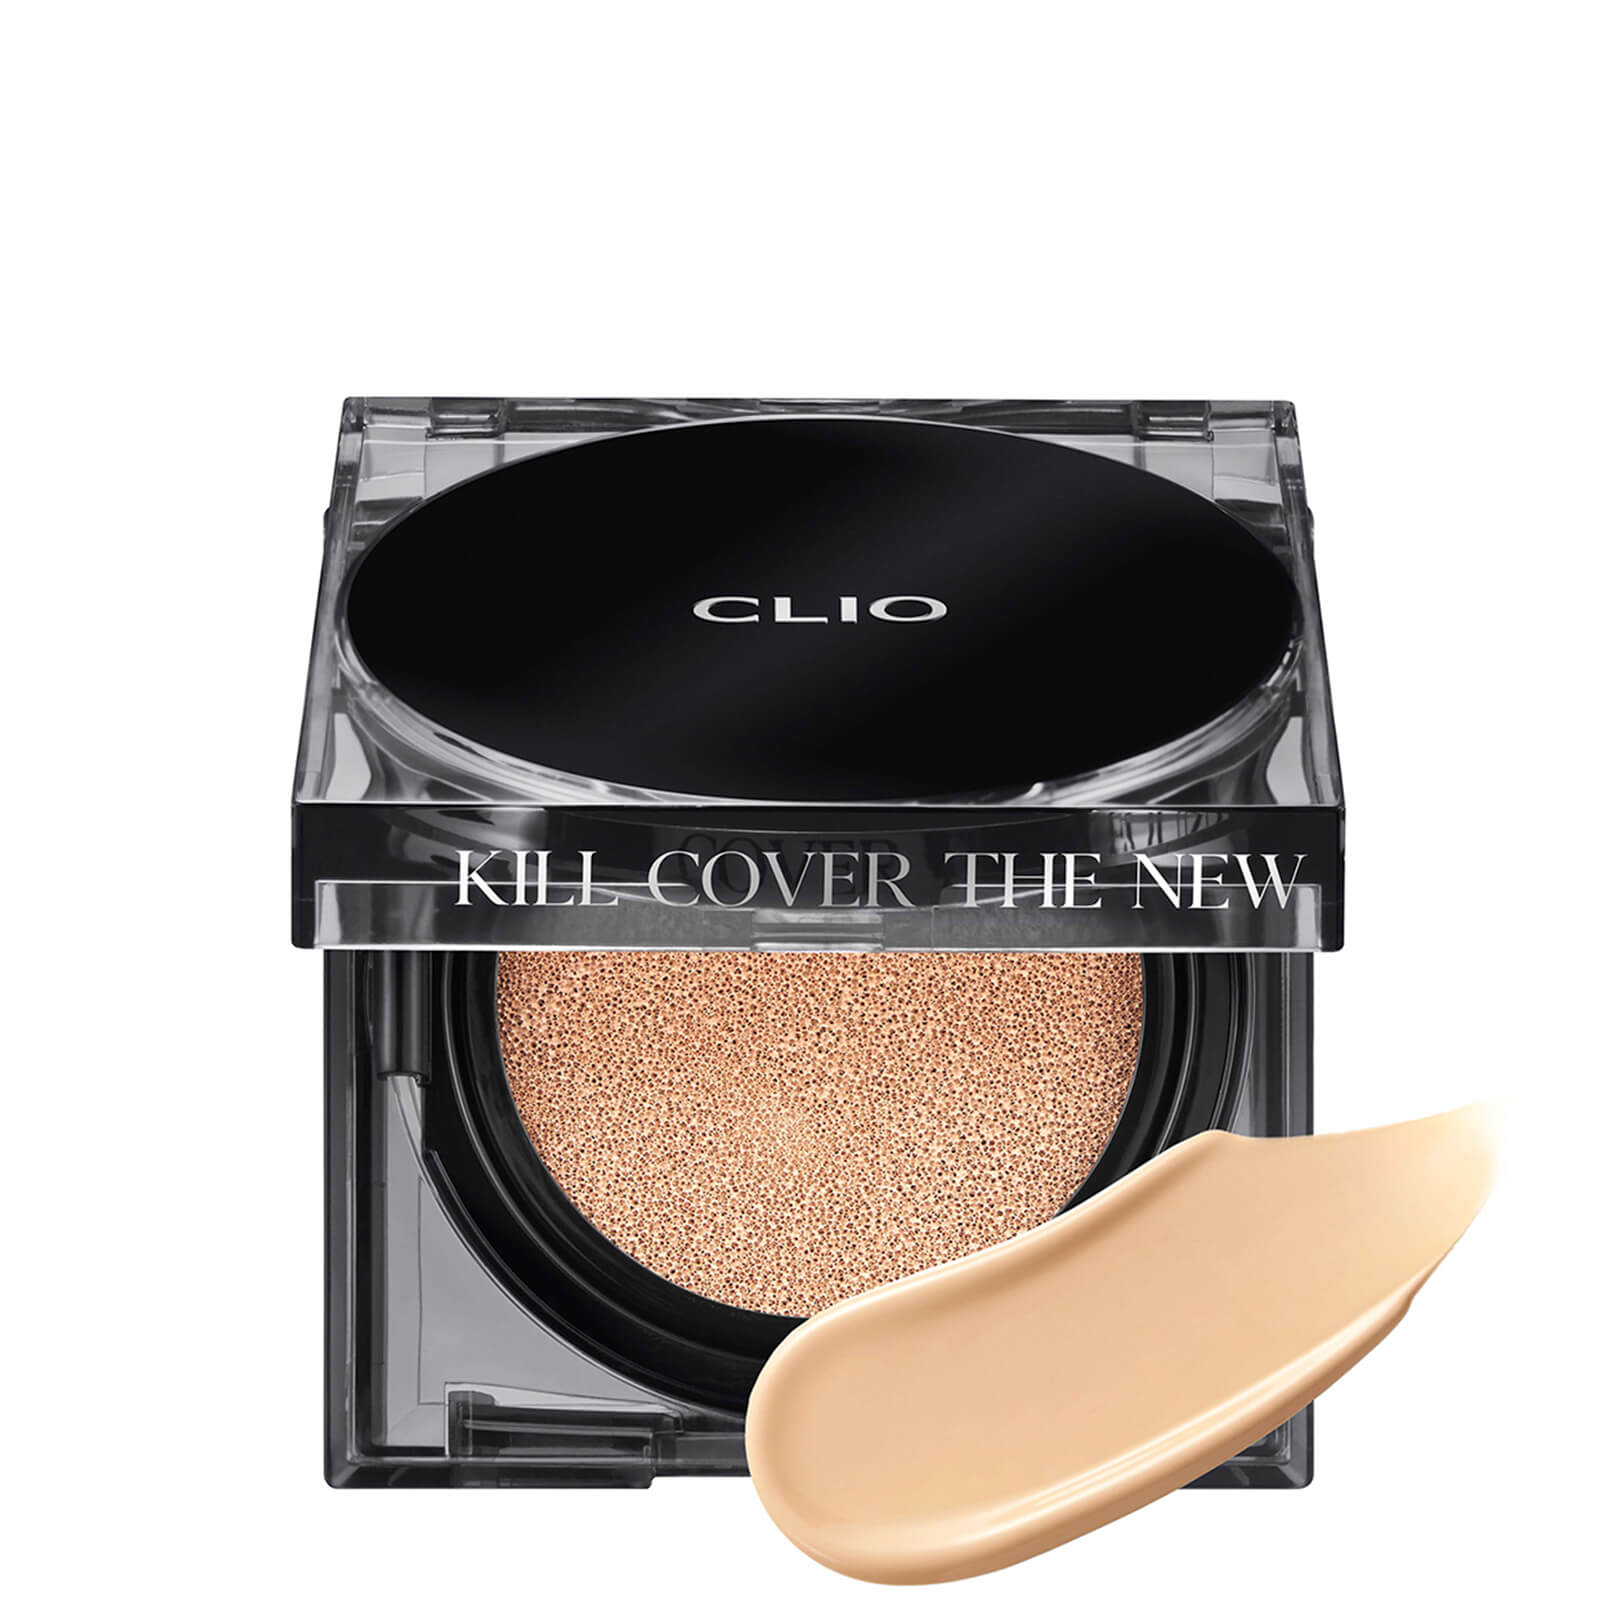 CLIO Kill Cover The New Founwear Cushion Foundation 30g (Various Shades) - 04 Ginger